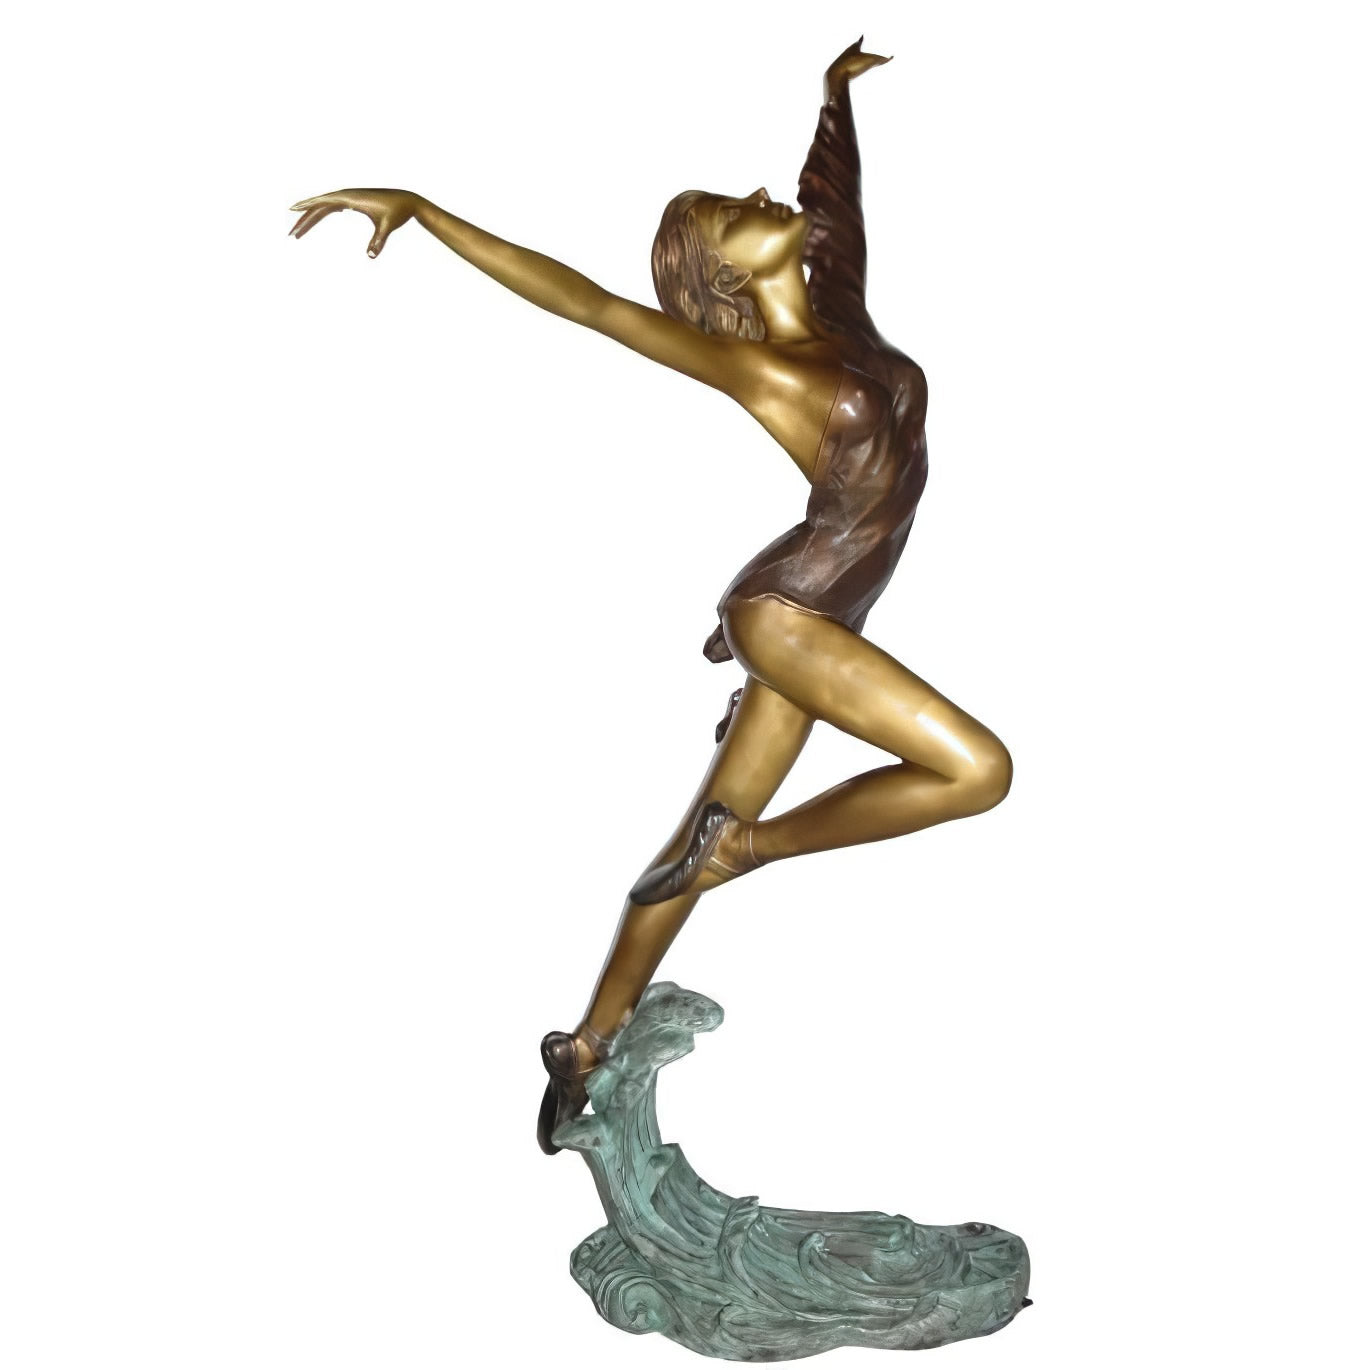 Leaping Lady Sculpture